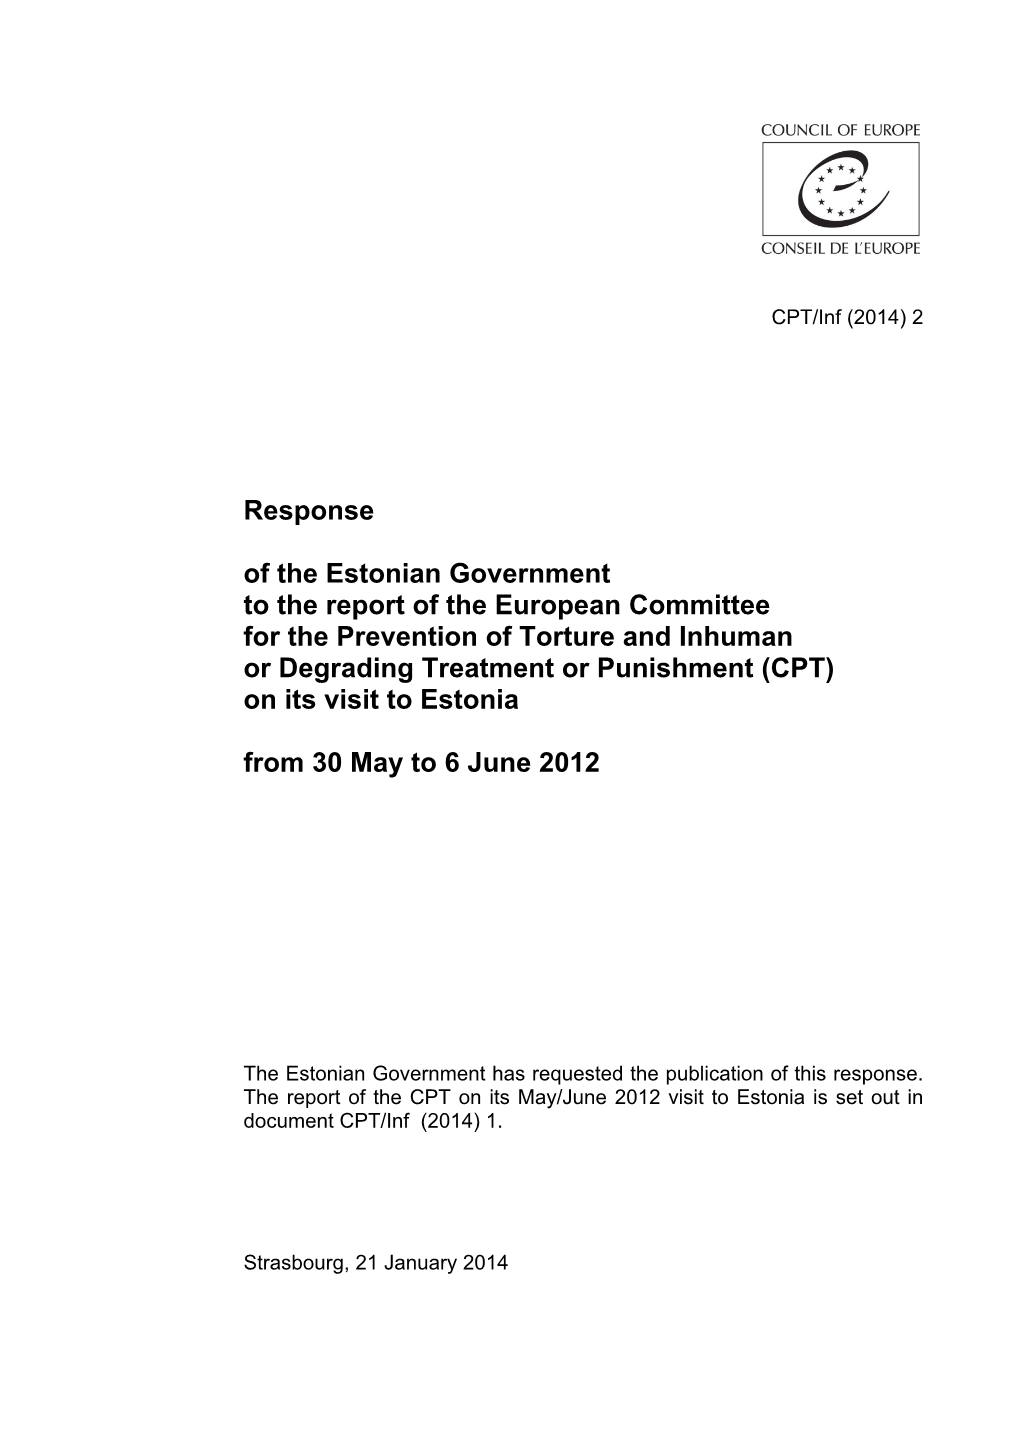 Response of the Estonian Government to the Report of the European Committee for the Prevention of Torture and Inhuman Or Degradi